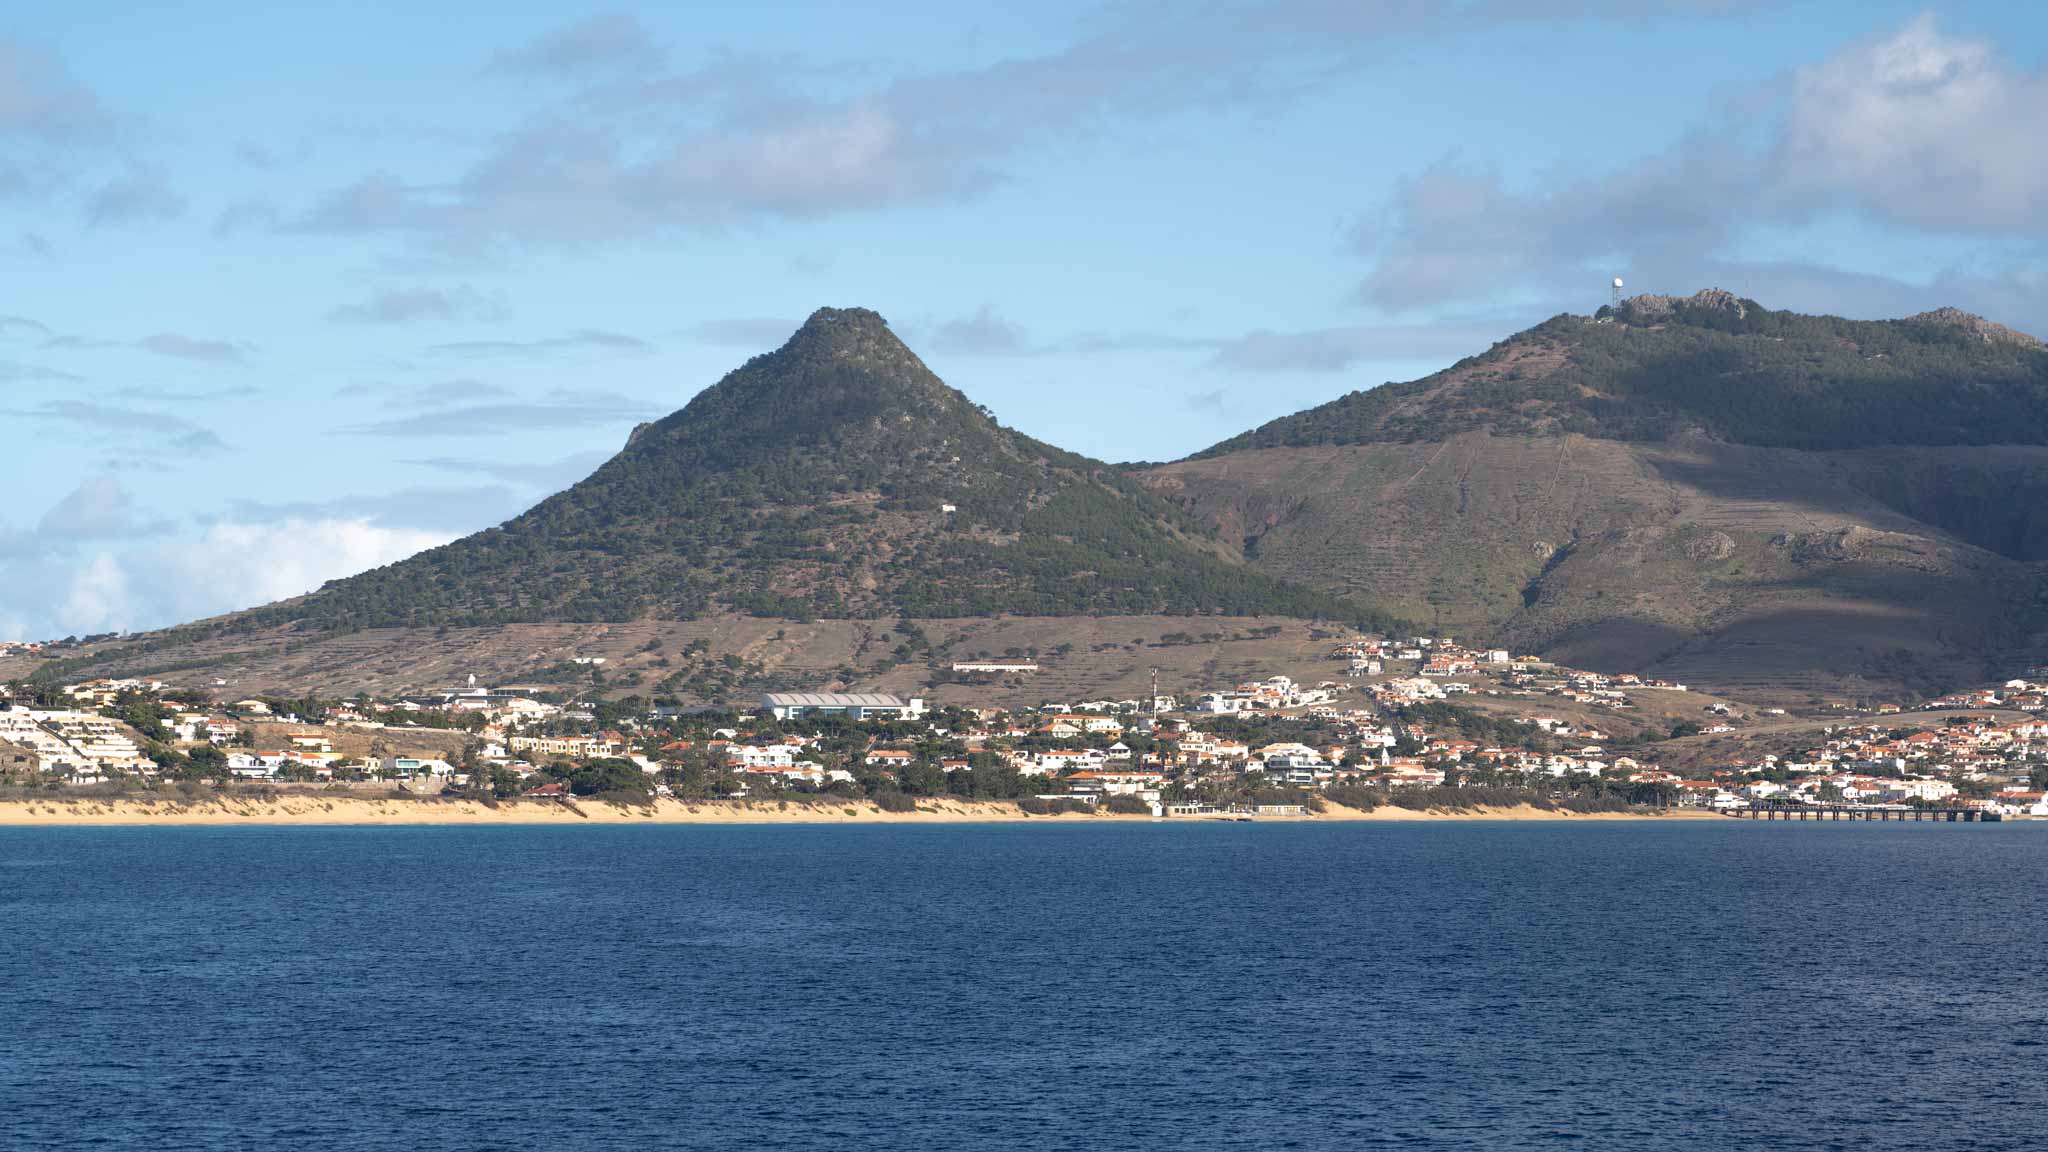 Porto Santo island, with various peaks, as seen from the ferry